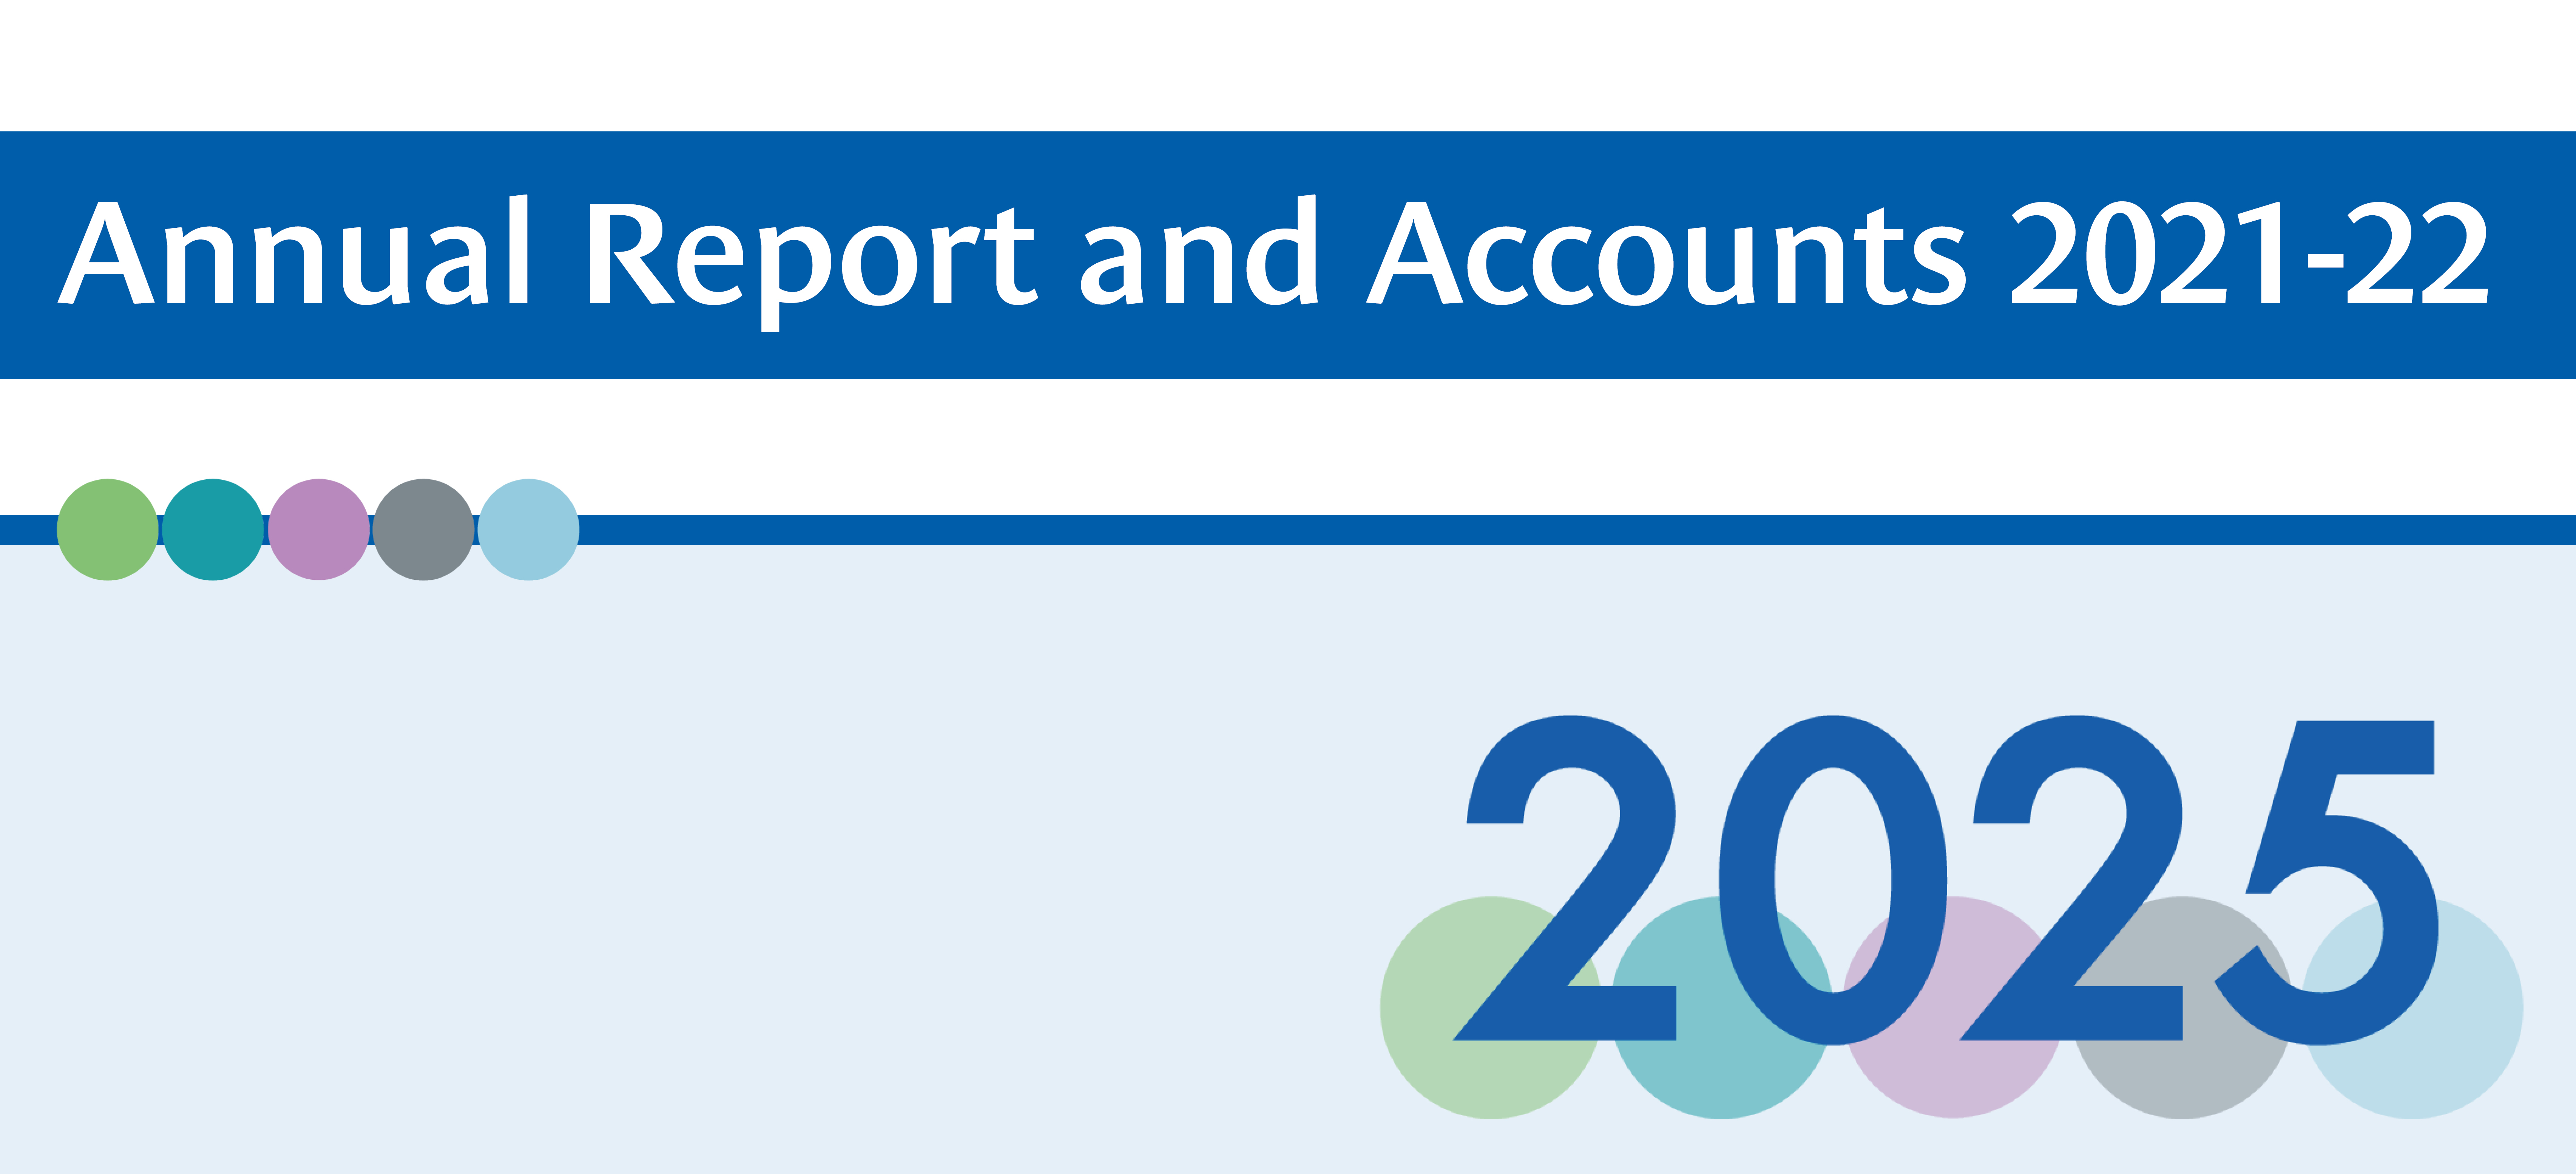 Annual Report and Accounts 2021-22